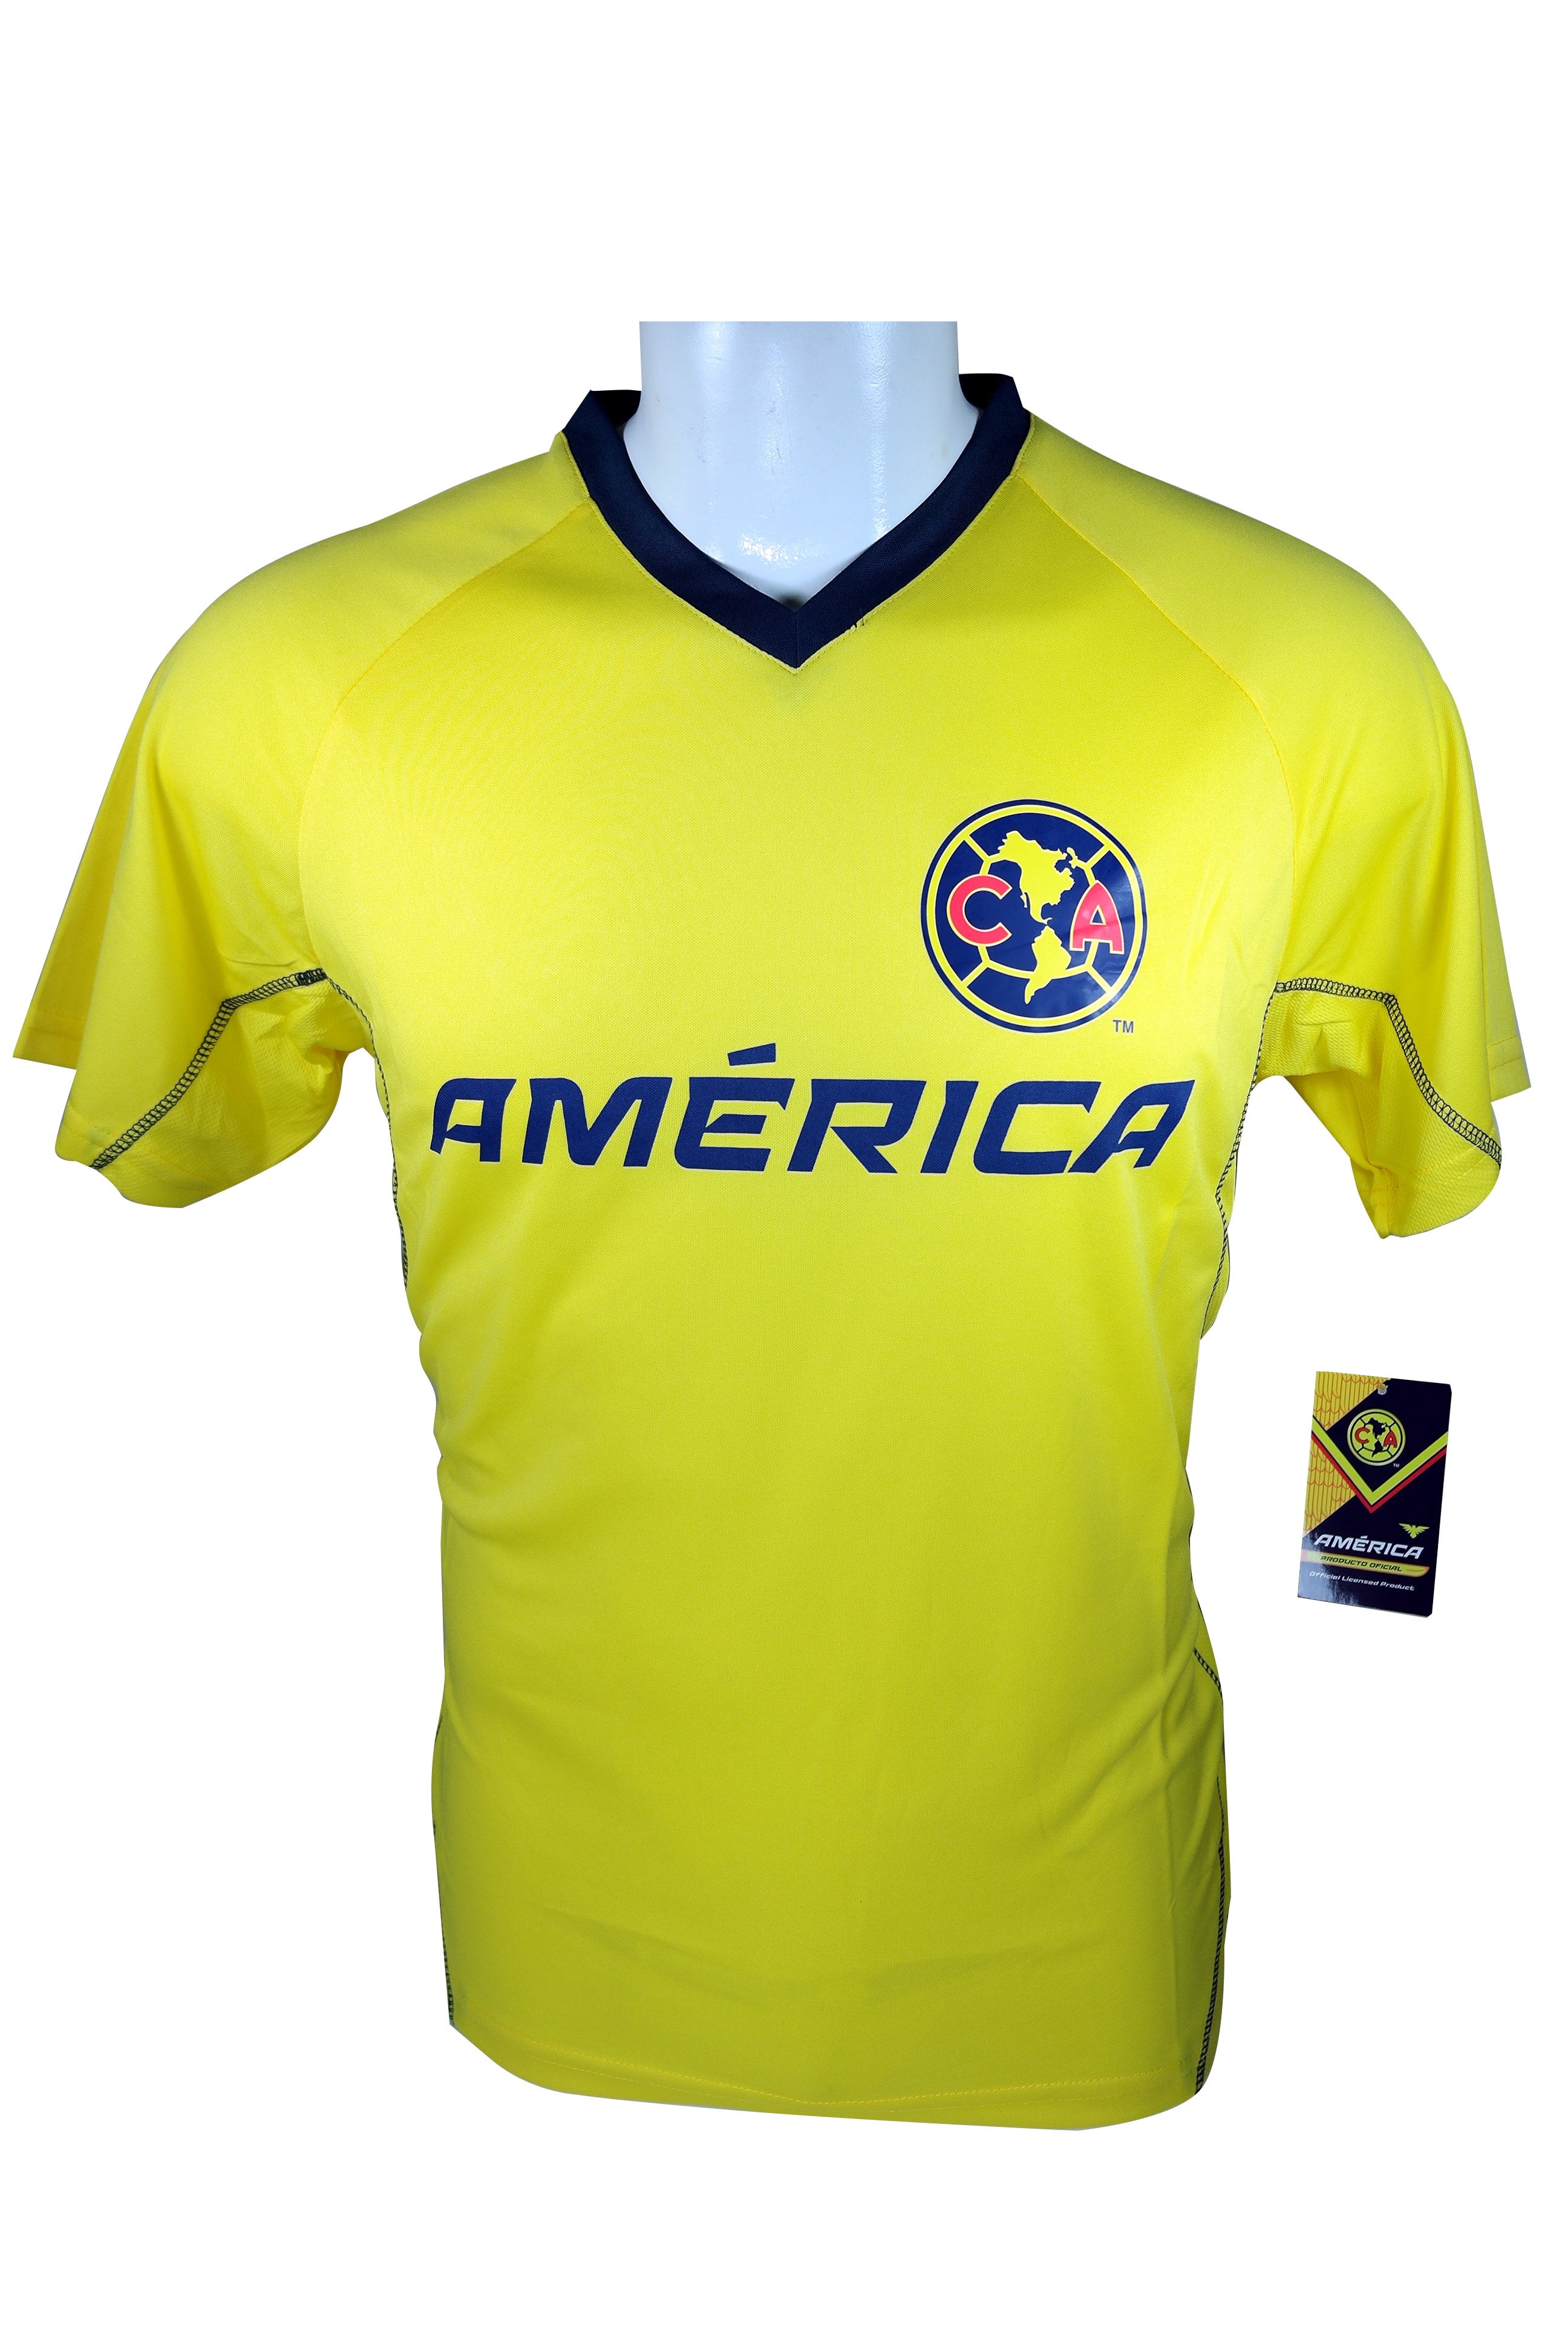 RhinoxGroup Adult Club America Official Soccer Poly Jersey Shirt 002 